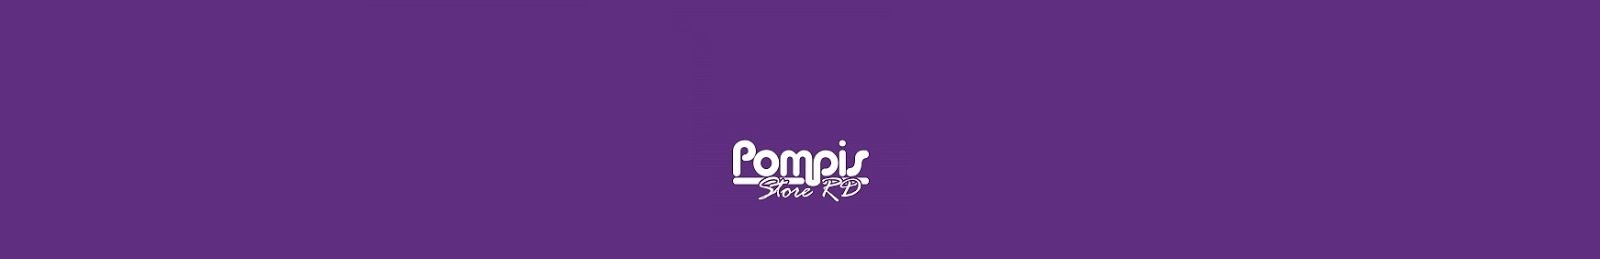 Pompis Store RD